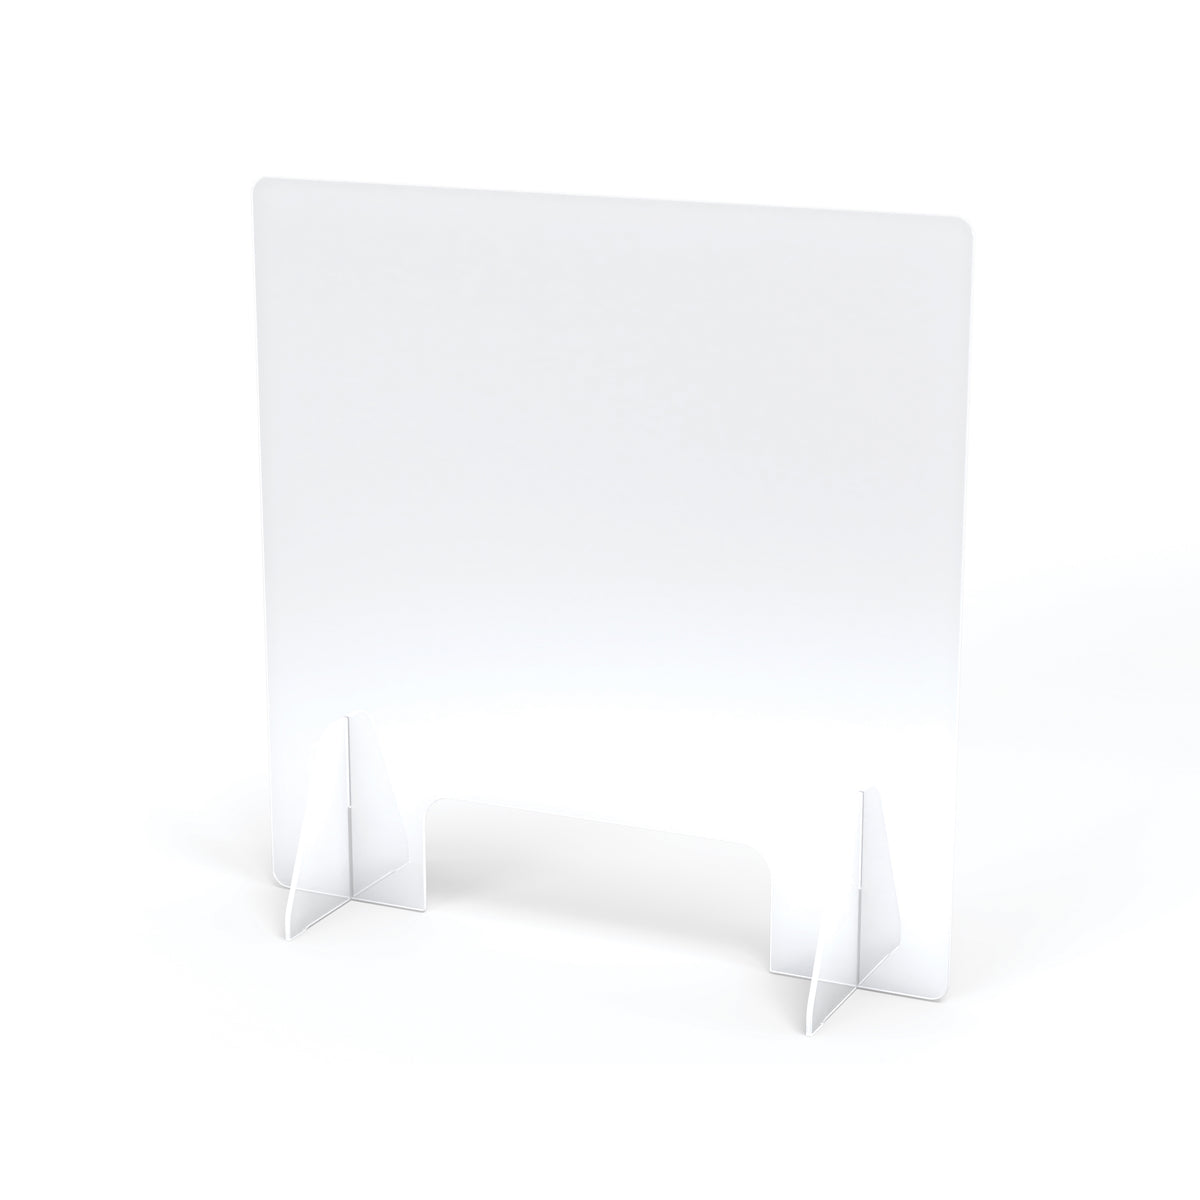 9825JC, Jonti-Craft See-Thru Table Divider Shields - 2 Station with Opening - 24" x 8" x 23.5"